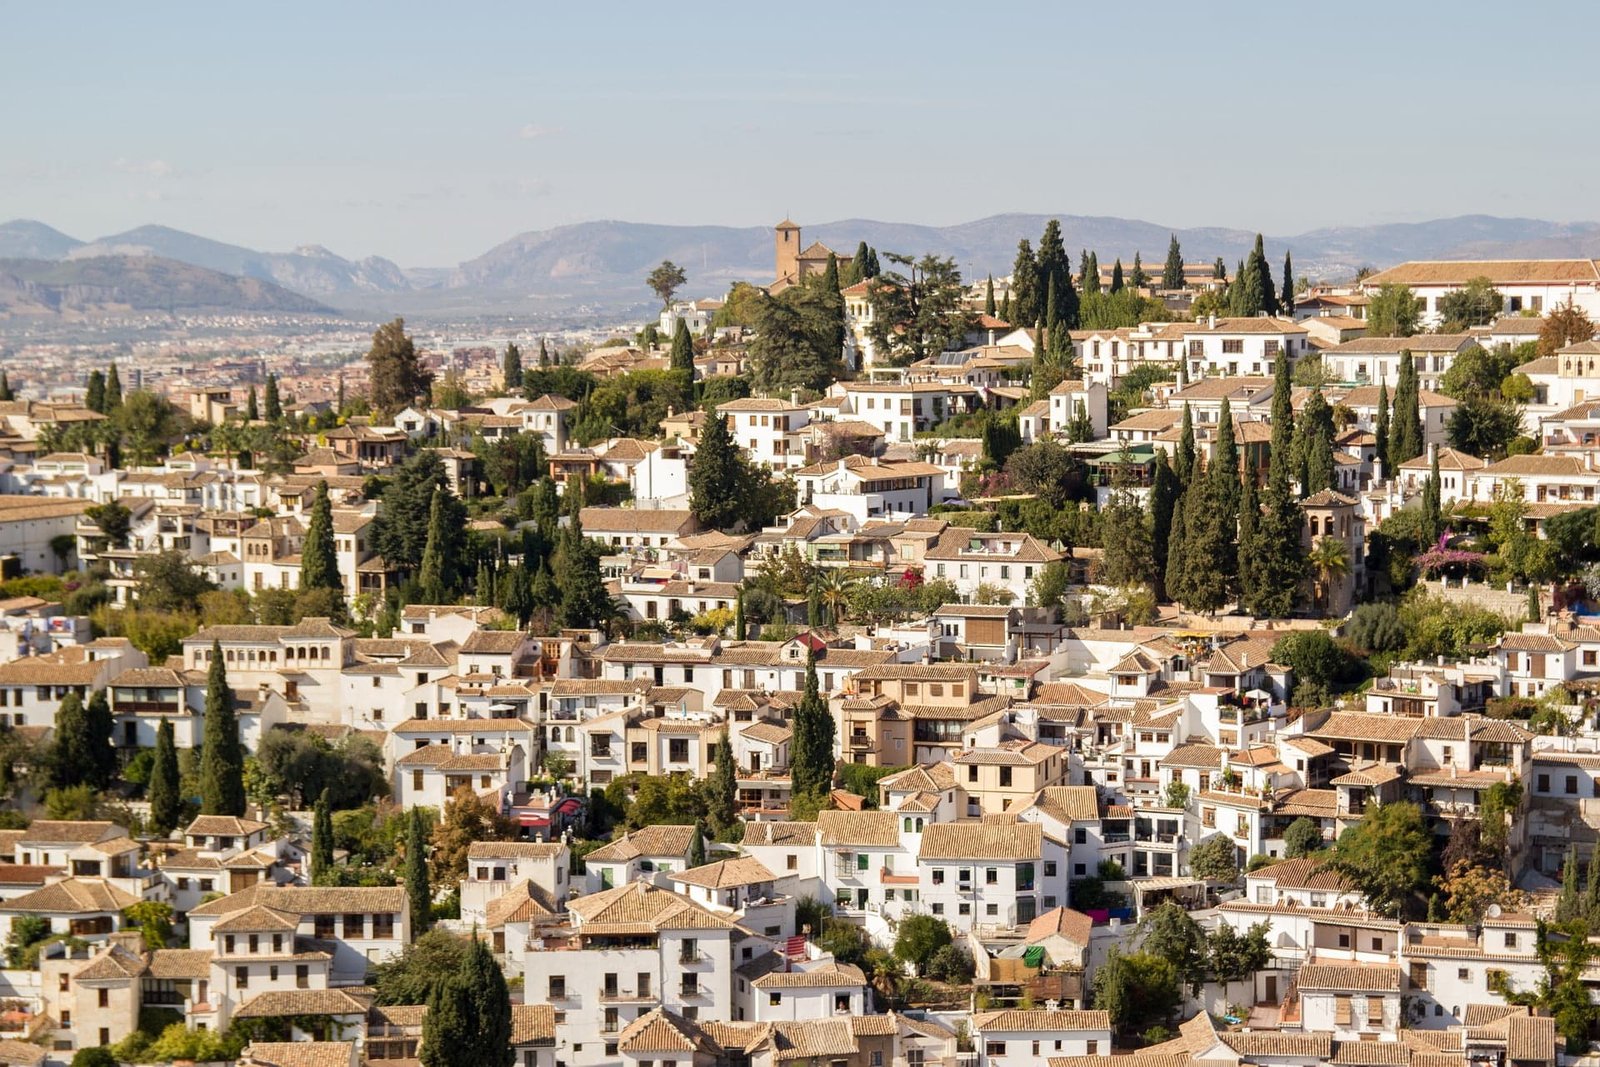 List of Cities and Towns in Spain